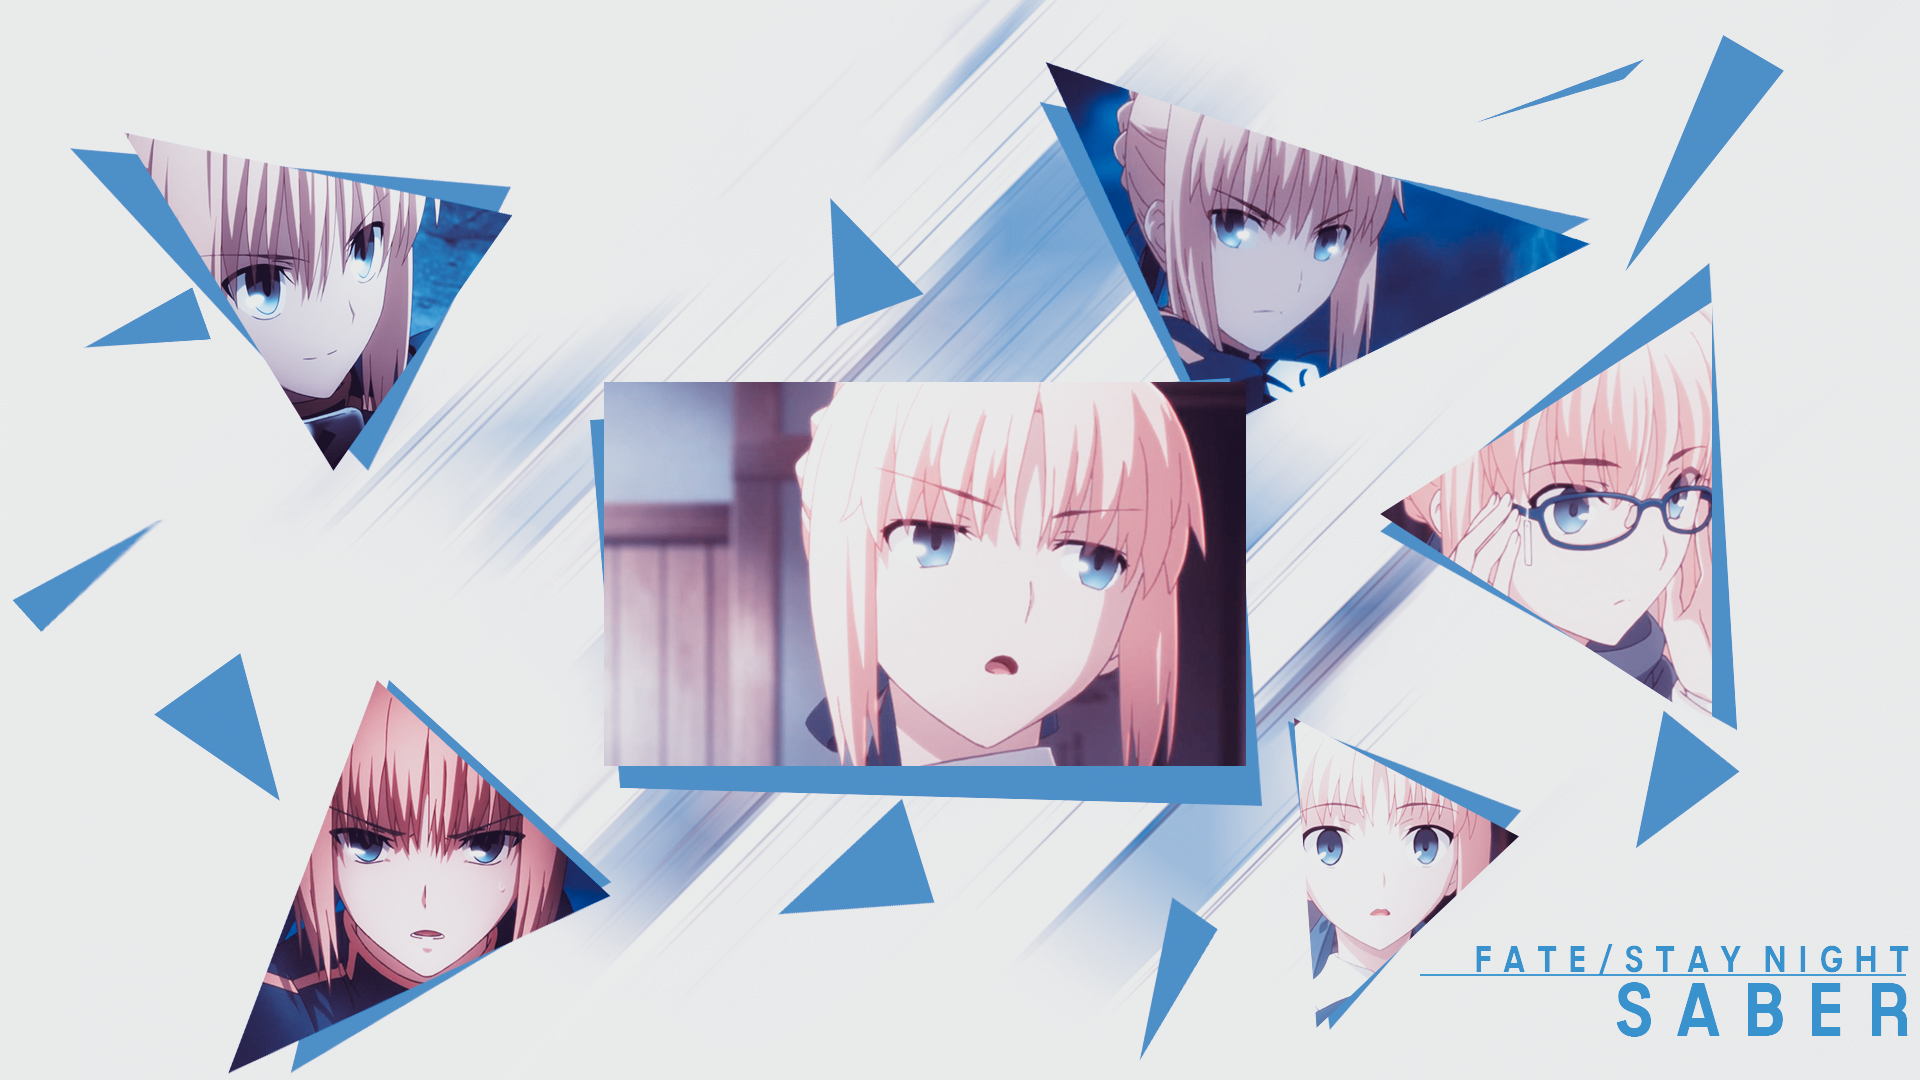 Anime 1920x1080 Fate/Stay Night anime girls Saber Fate series